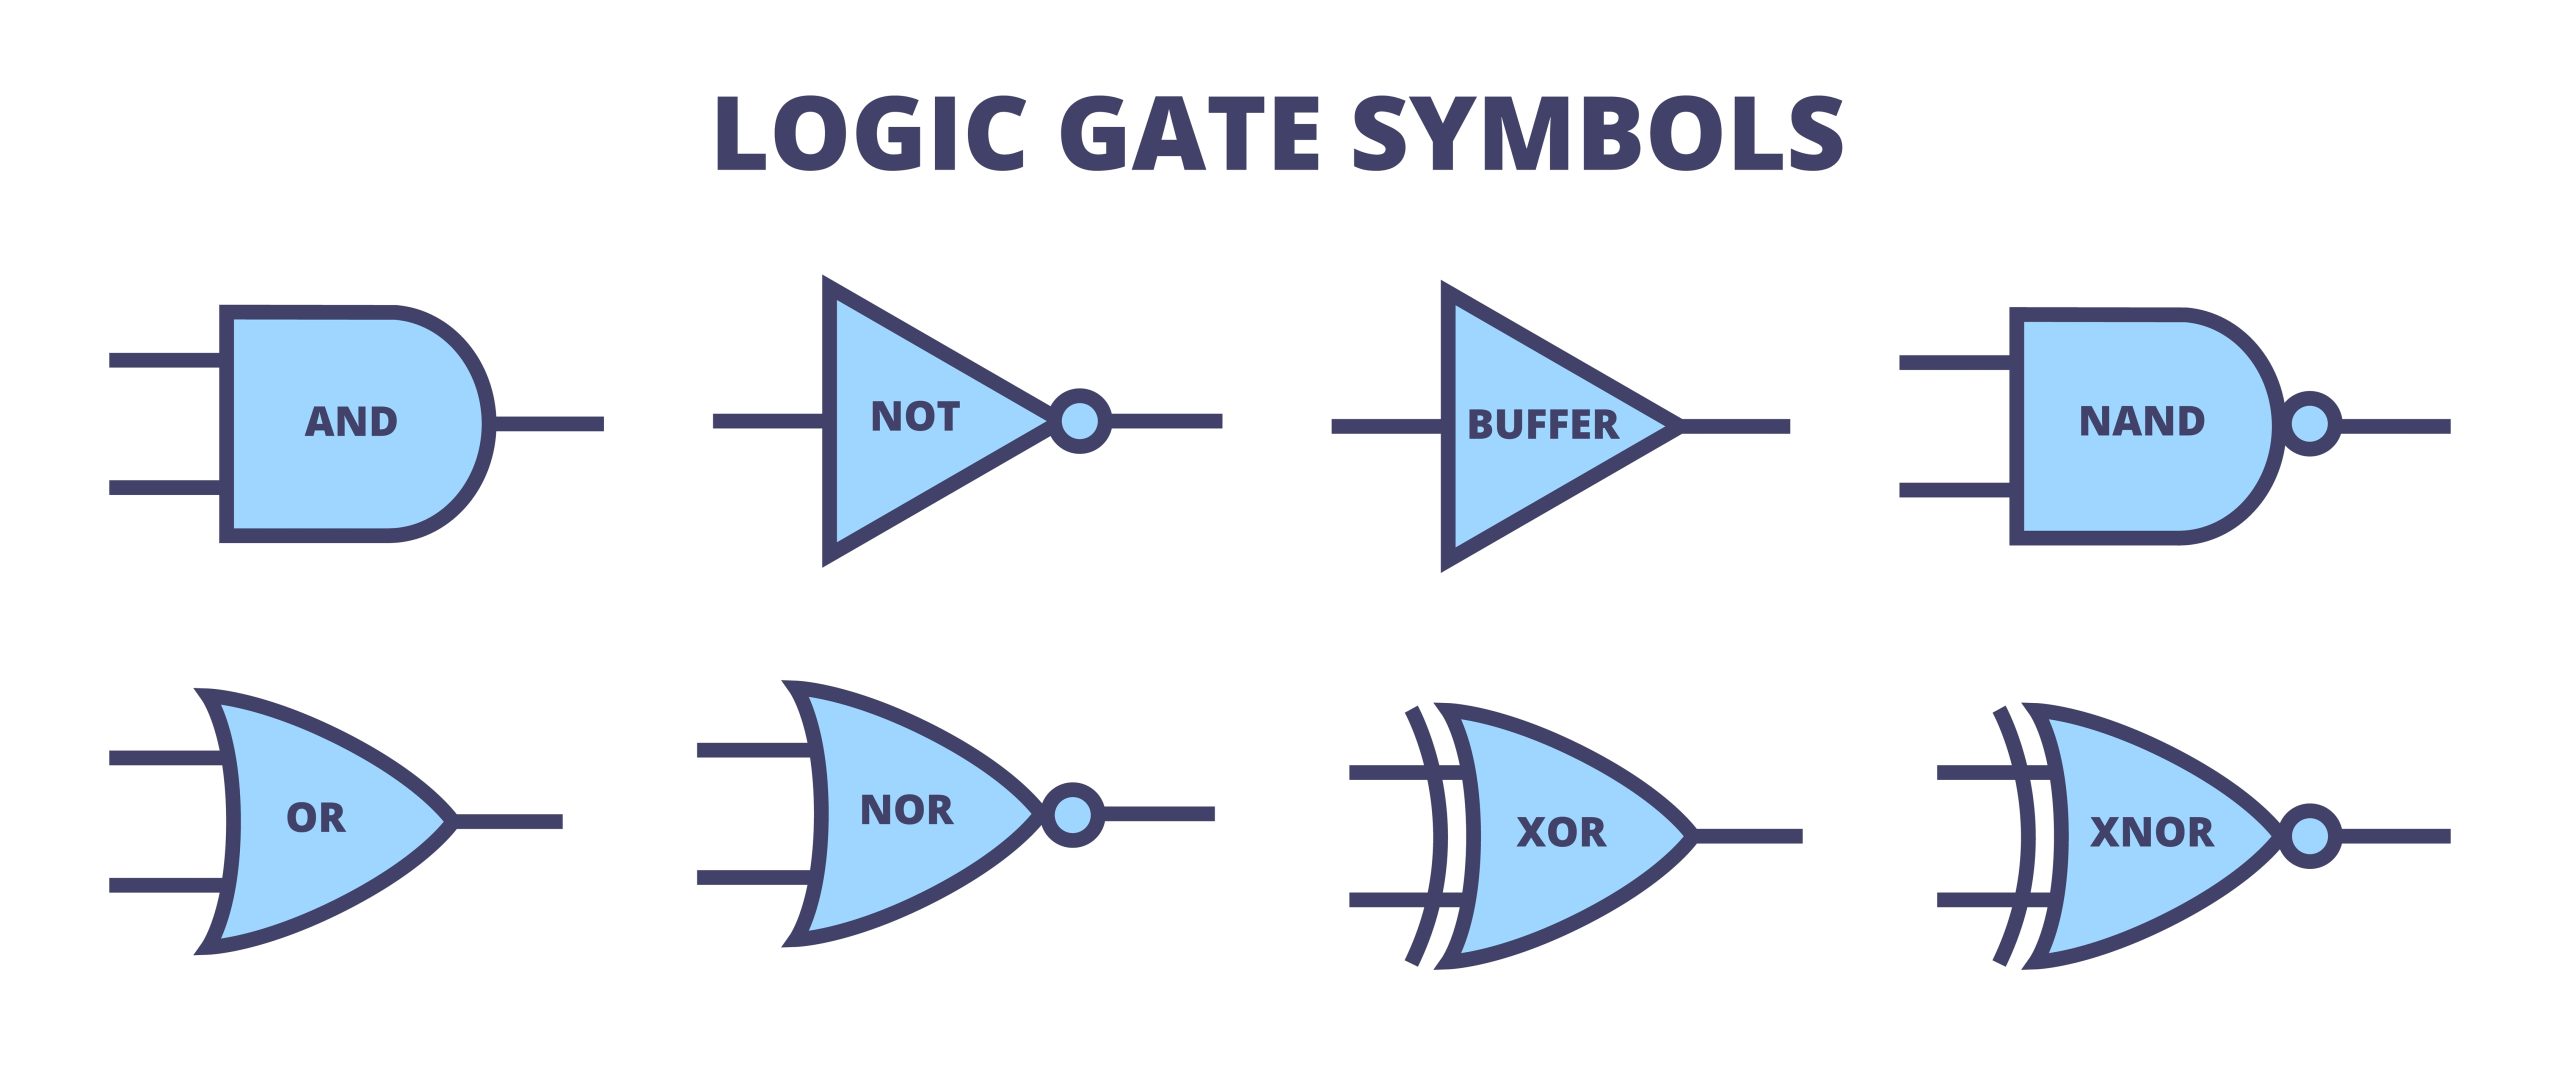 Vector symbols of the different logic gate types